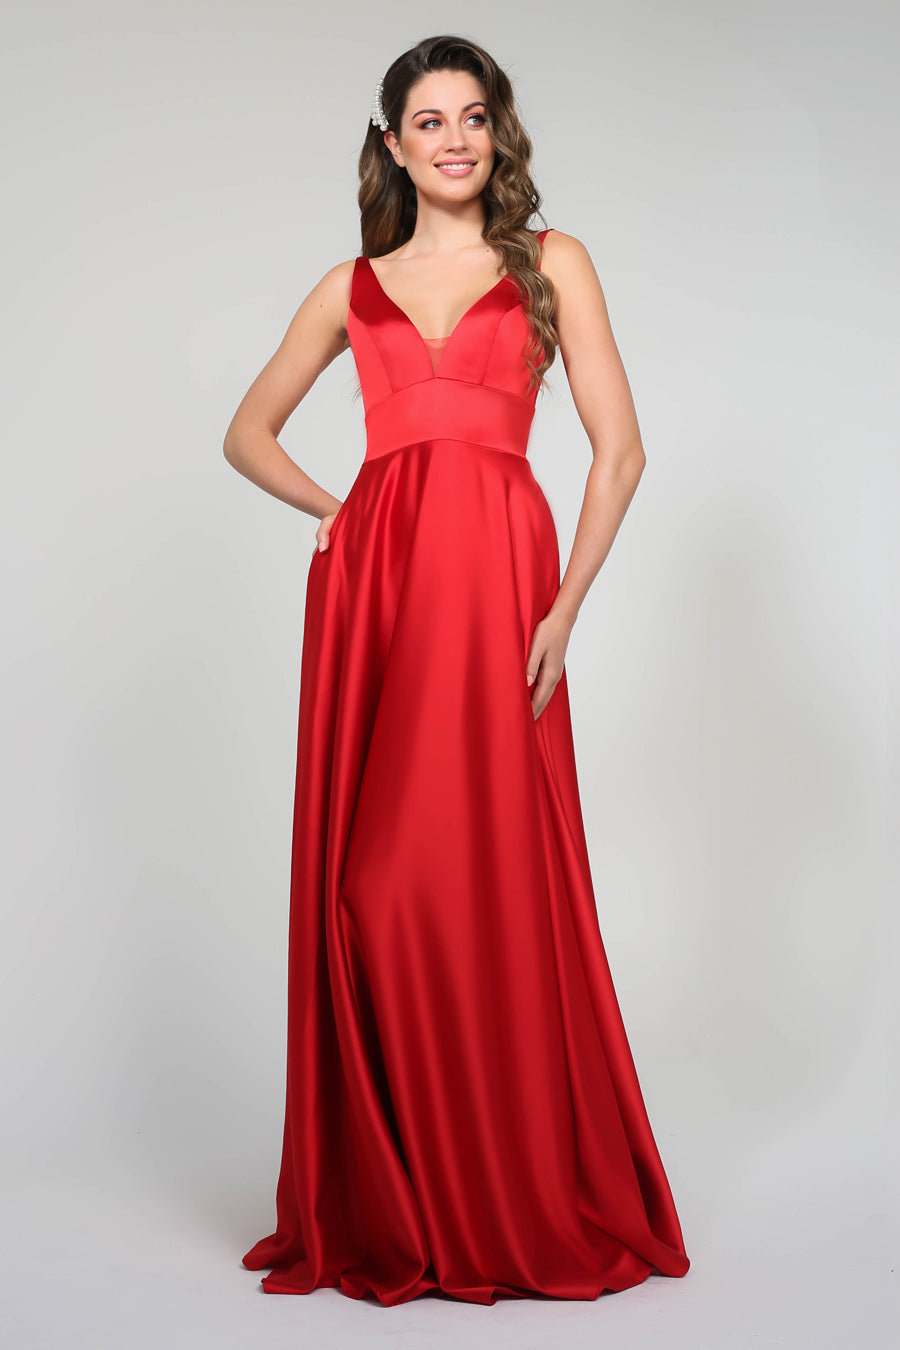 Tinaholy Couture Designer BA269 Red Satin Formal Dress Tina Holly Couture$ AfterPay Humm ZipPay LayBuy Sezzle